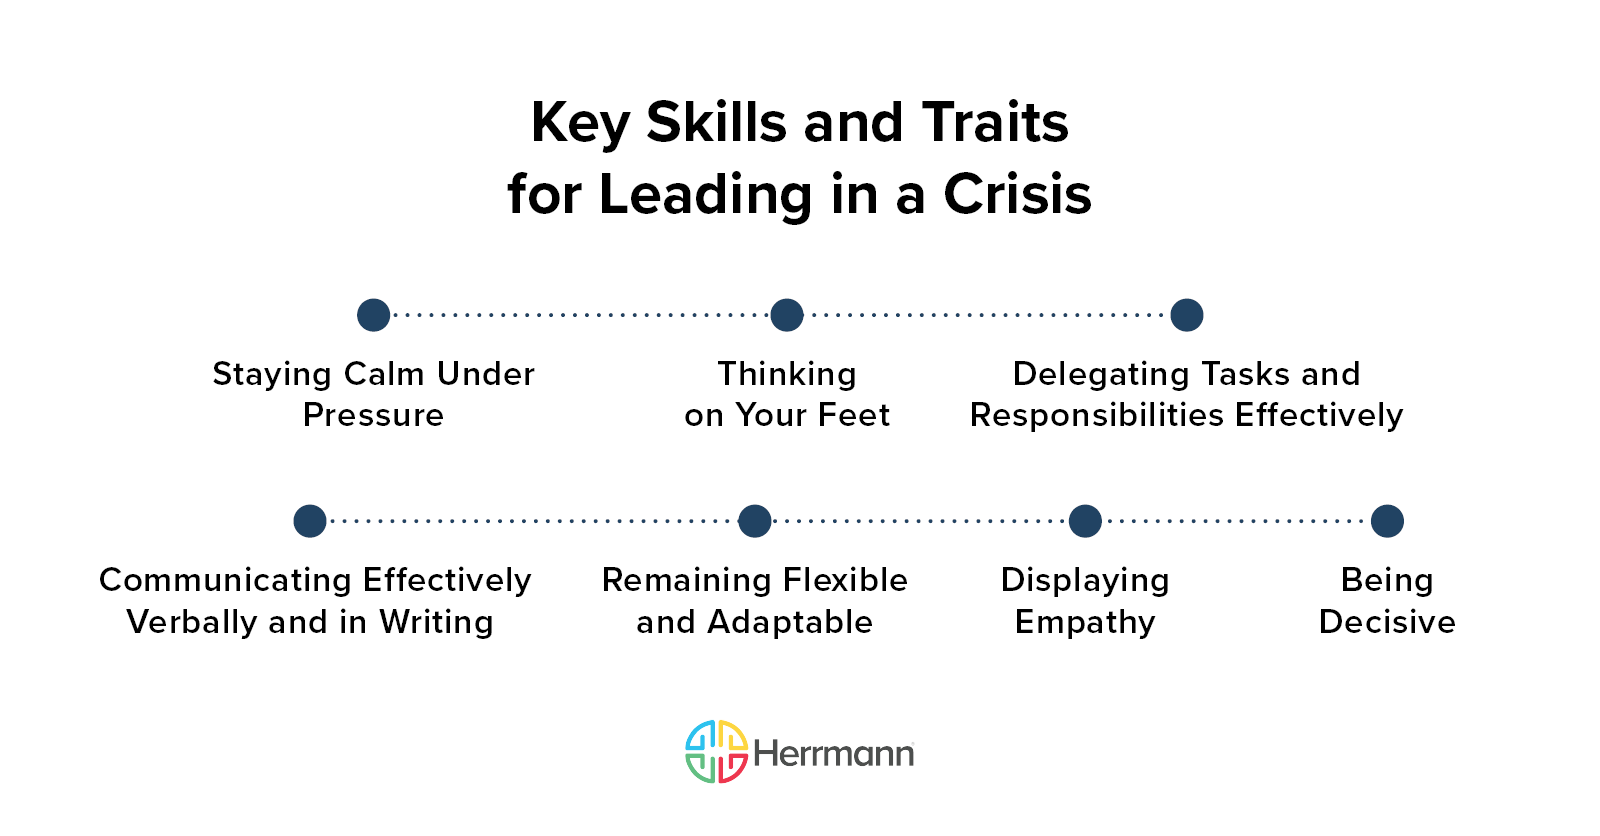 Key Skills and Traits for Leading in a Crisis